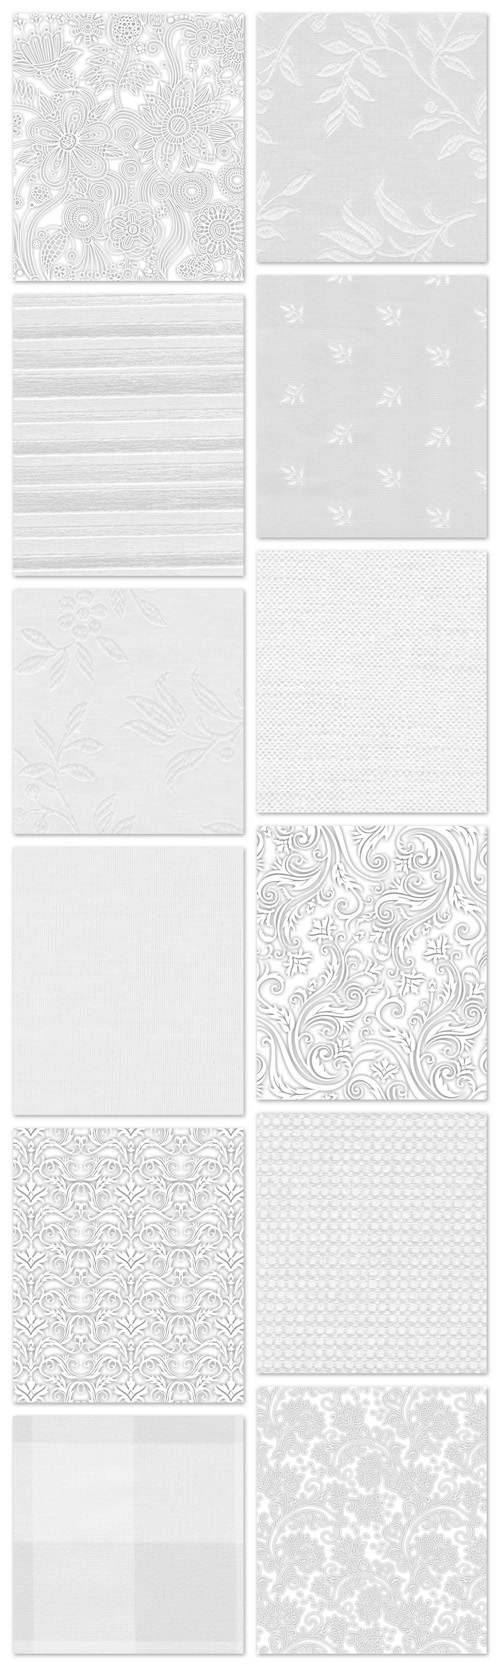 White Fabric Textures - White fabric, lace, texture